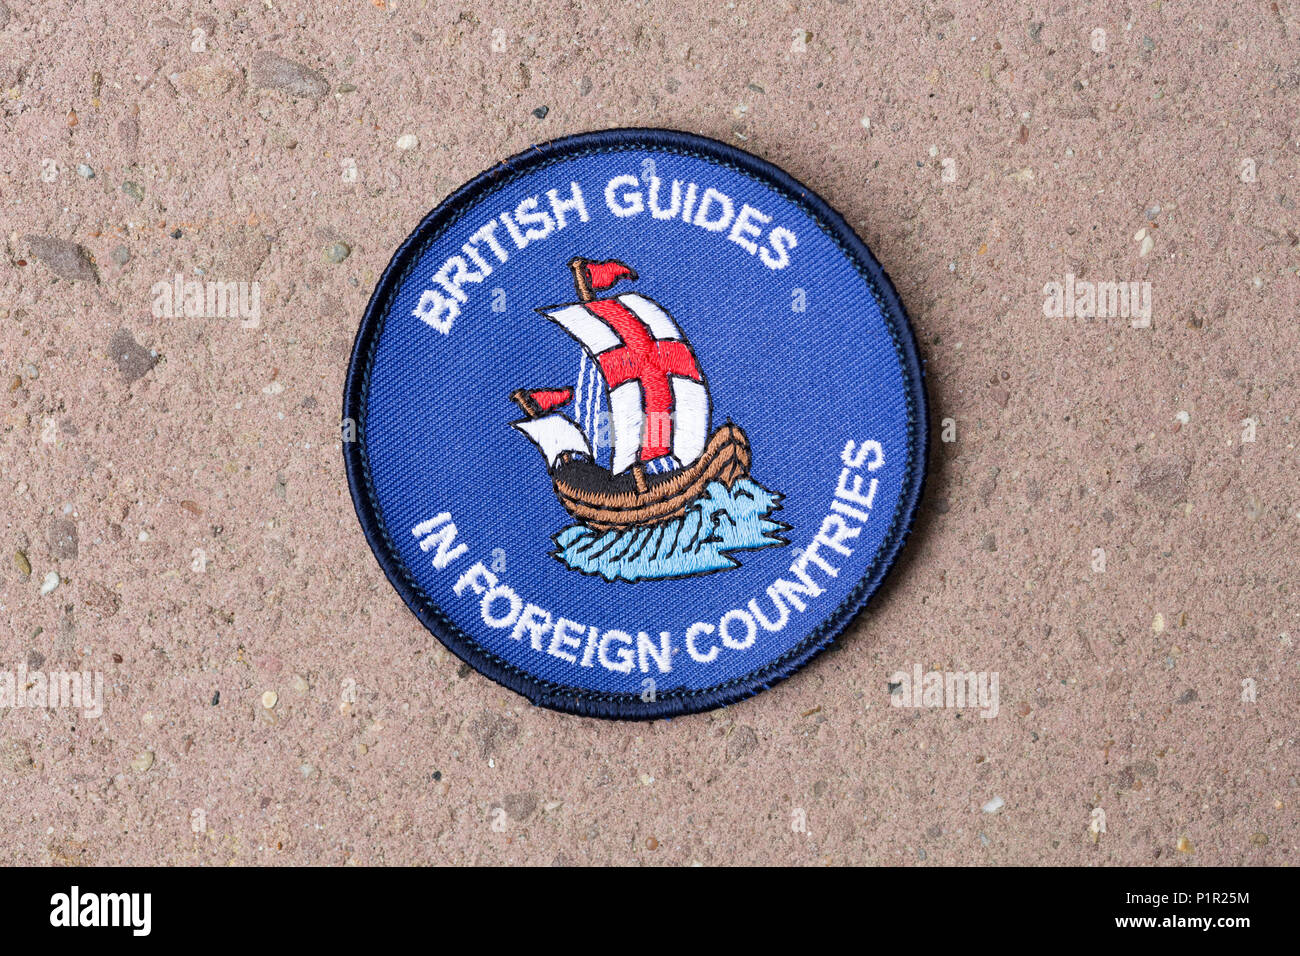 Girl Guide / Brownies badge celebrating British guides in foreign countries / overseas Stock Photo